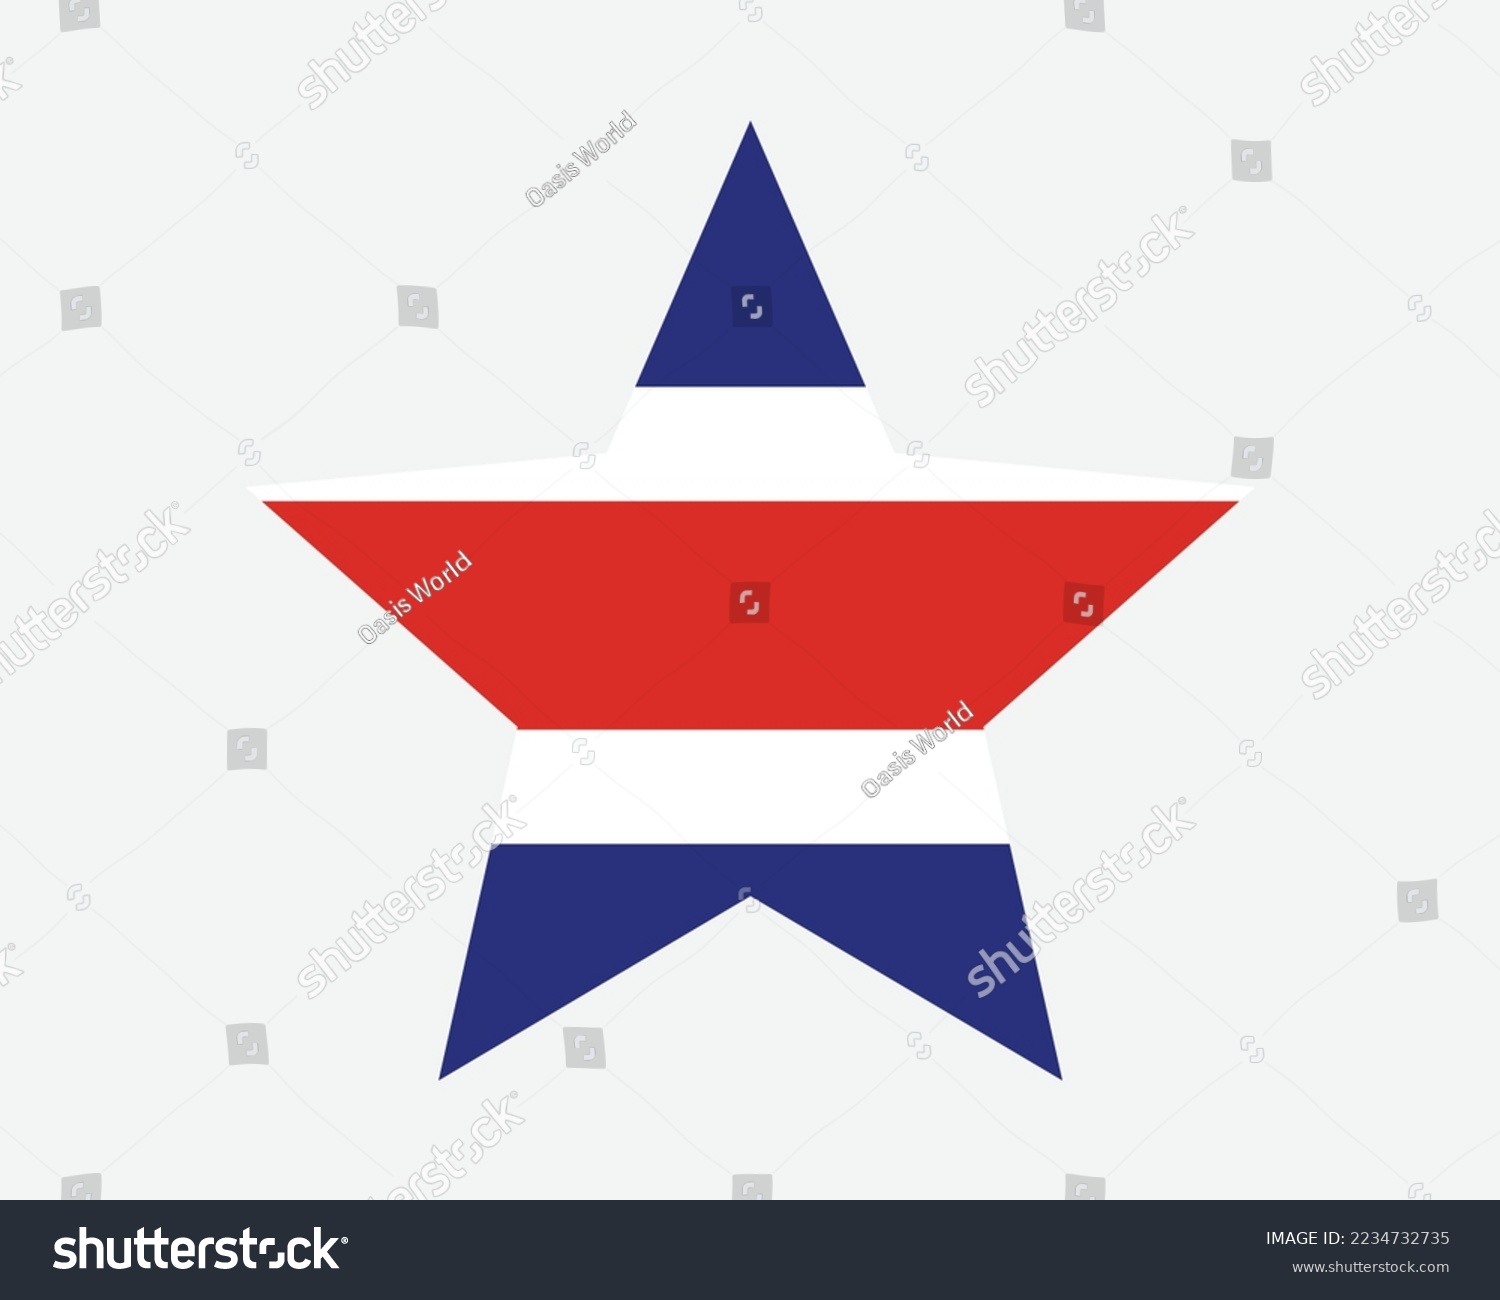 SVG of Costa Rica Star Flag. Costa Rican Star Shape Flag. Country National Banner Icon Symbol Vector 2D Flat Artwork Graphic Illustration svg